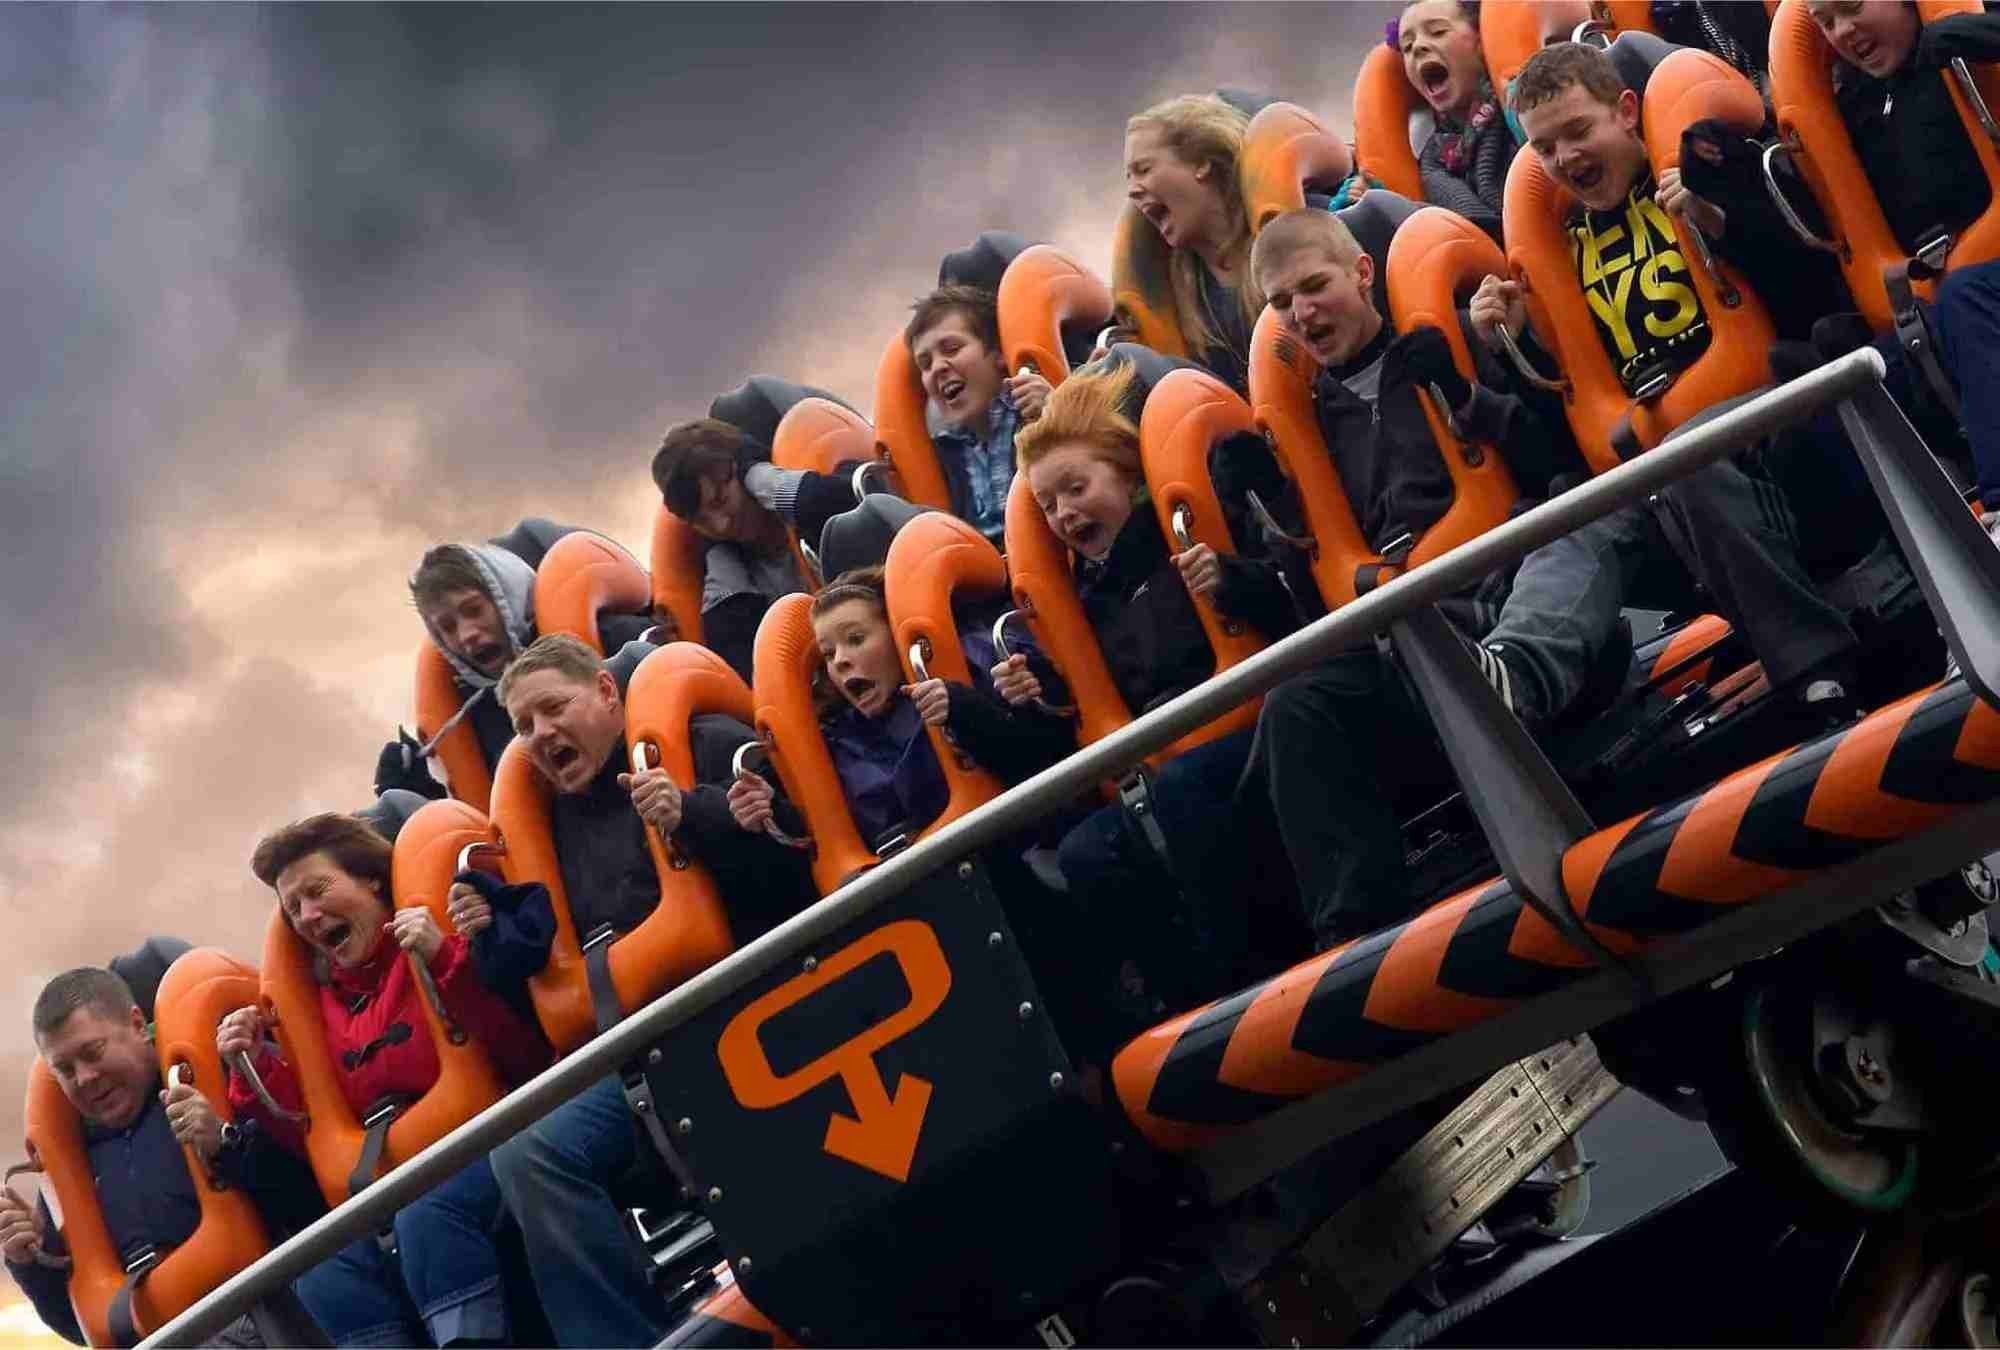 There are numerous rides and attractions at Alton Towers.